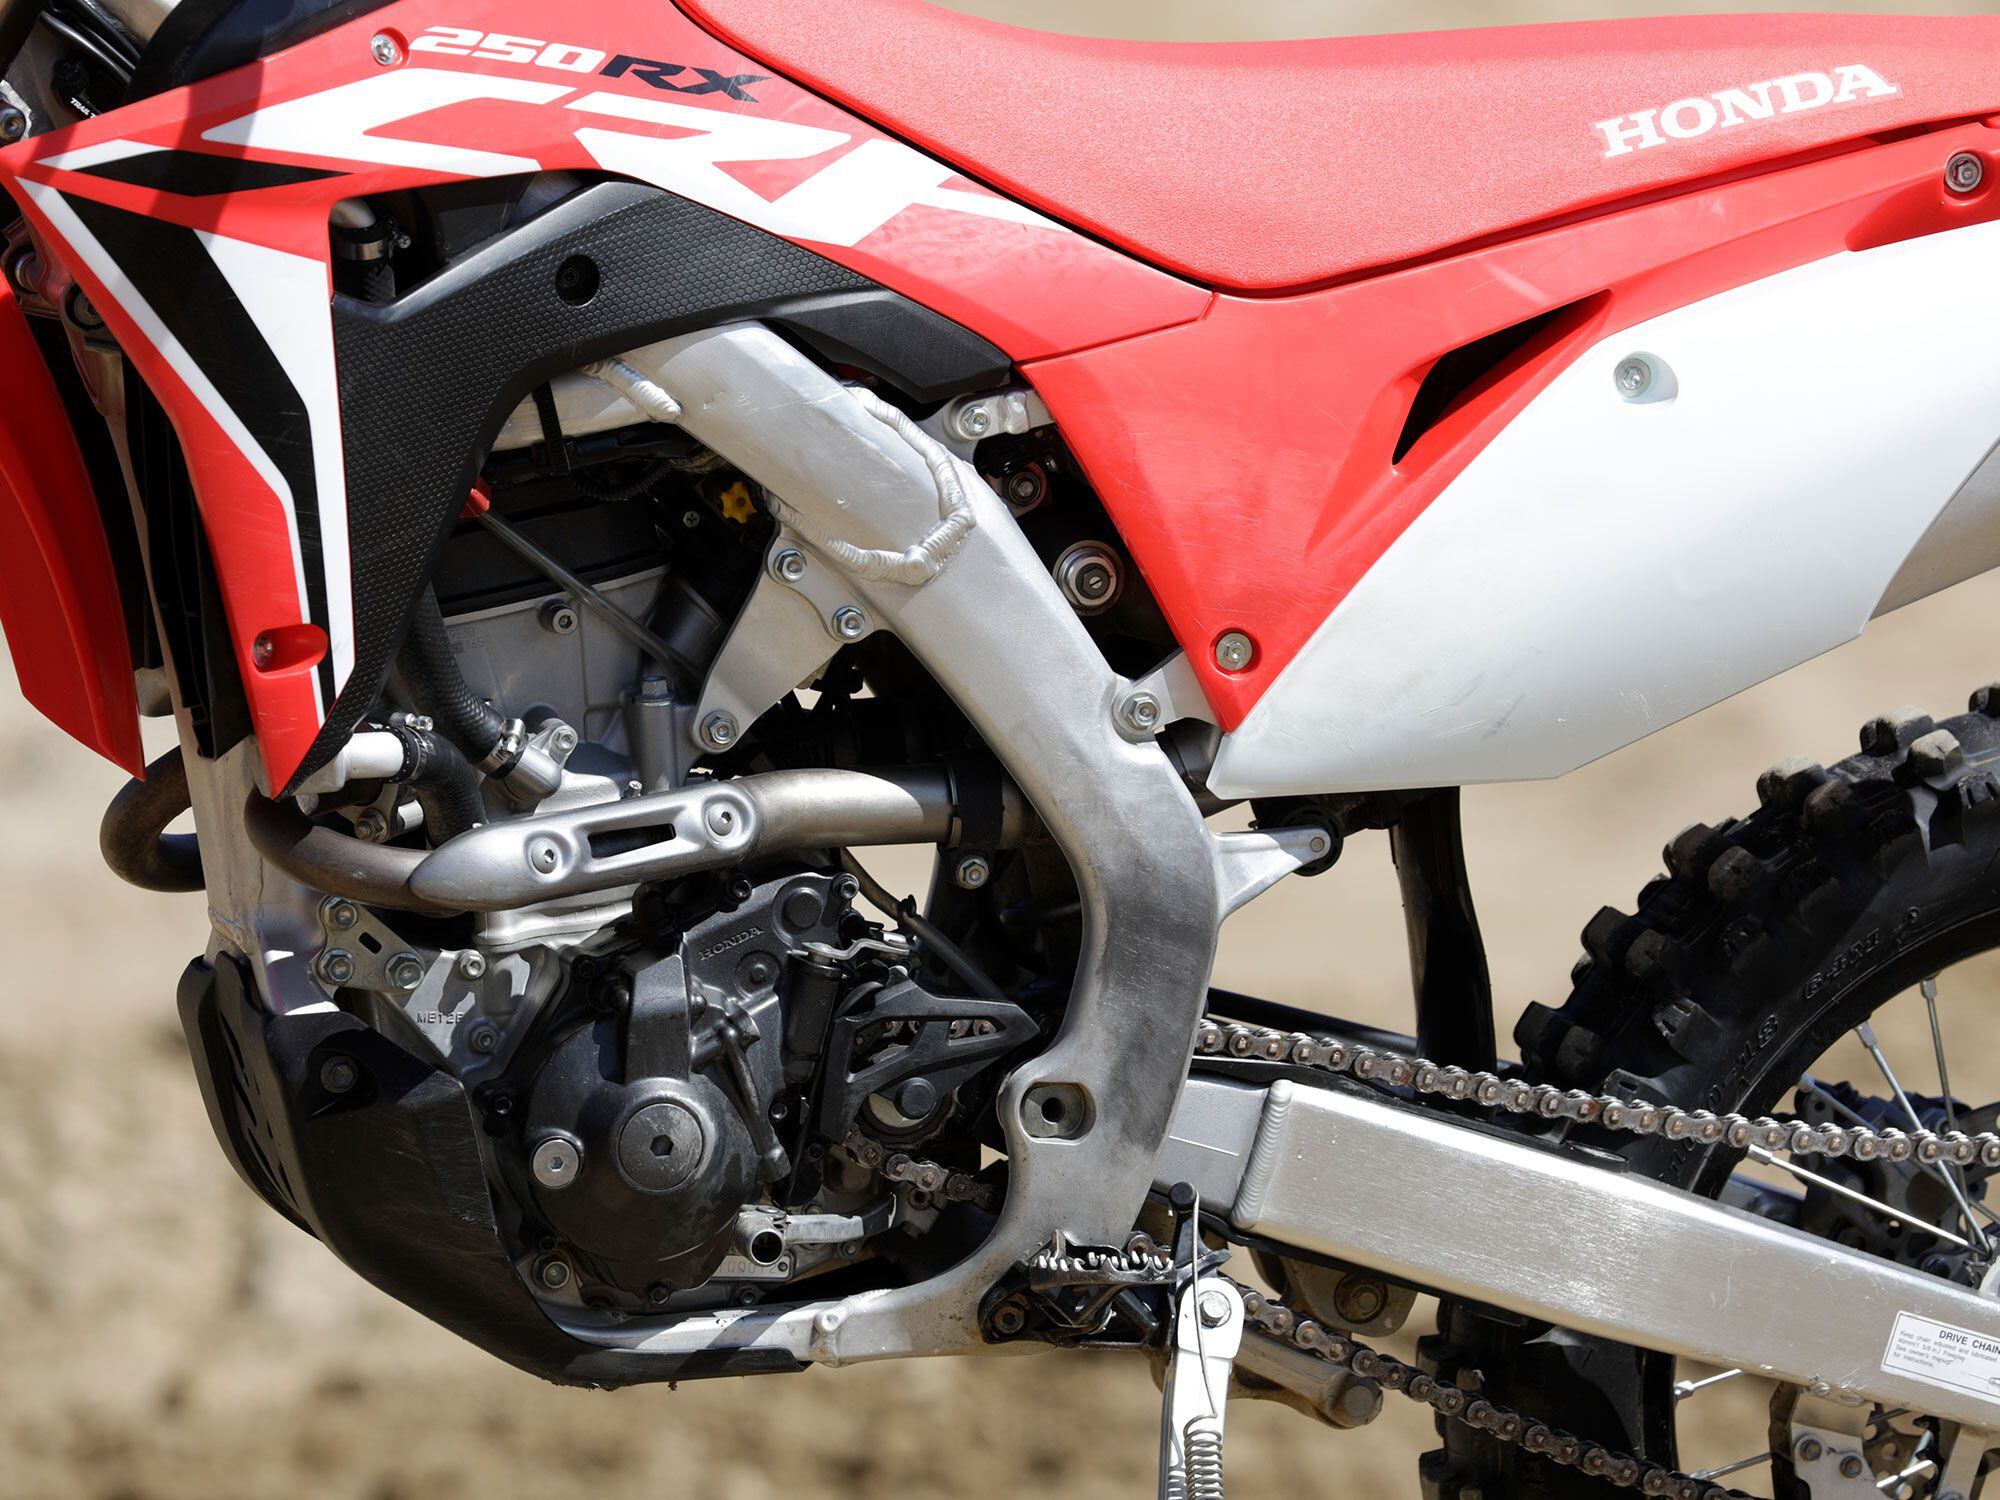 The 2021 CRF250RX uses a liquid-cooled 249cc single. Fuel-injection and electric start make it easy to get the engine lit.